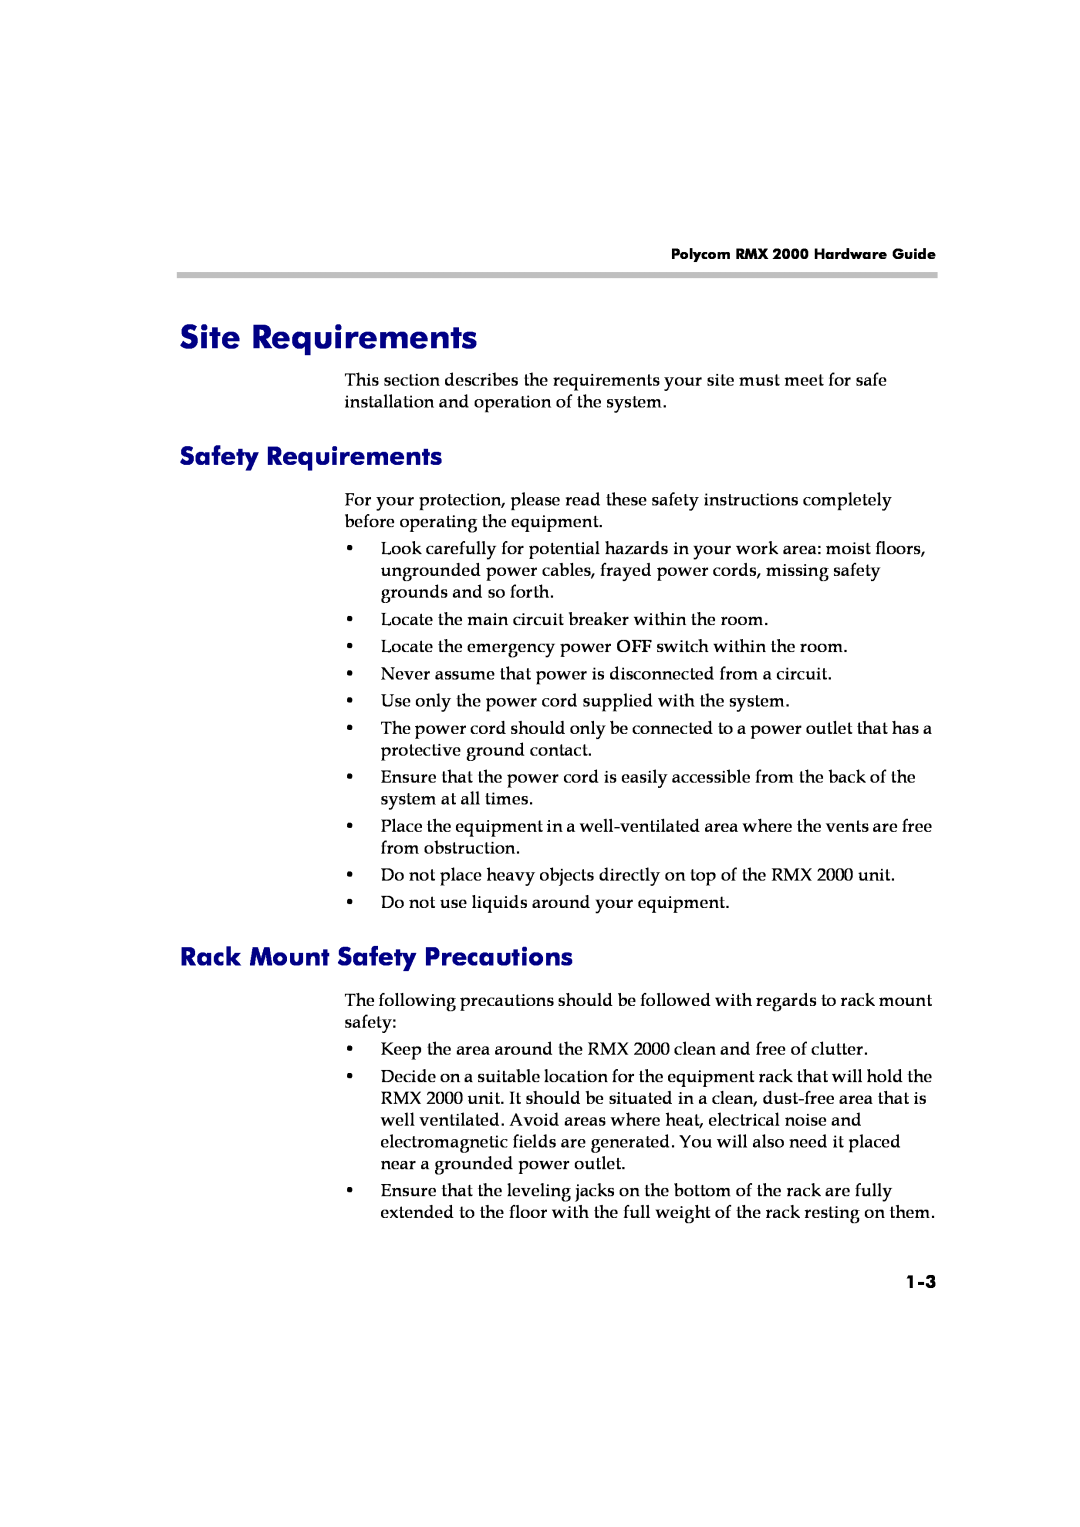 Polycom RMX 2000 manual Site Requirements, Safety Requirements, Rack Mount Safety Precautions 